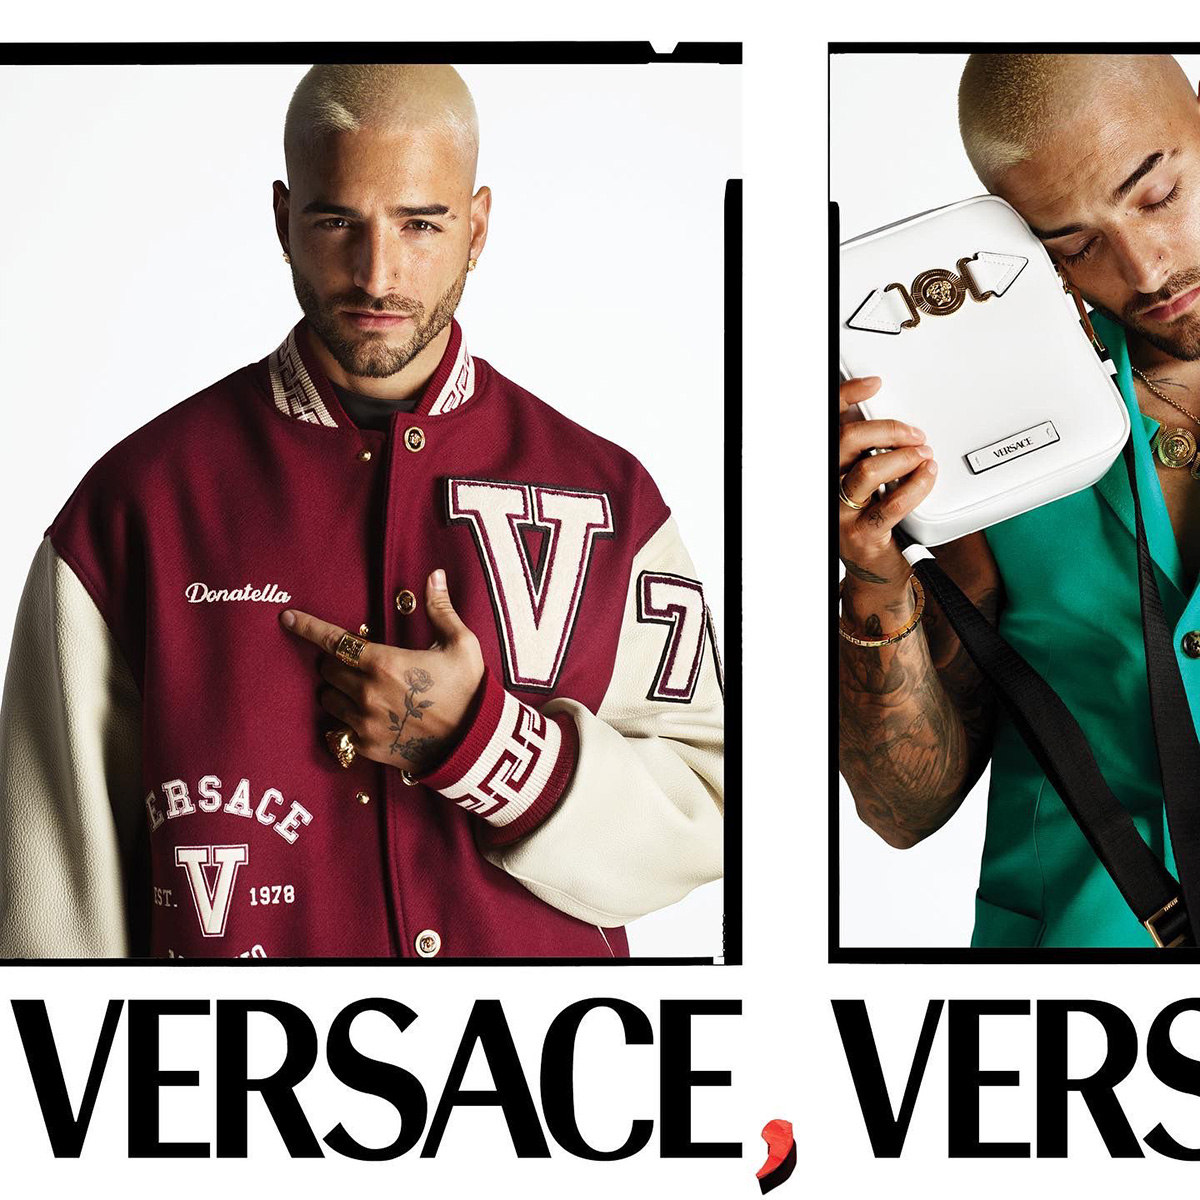 Maluma in his first campaign as a Versace model.